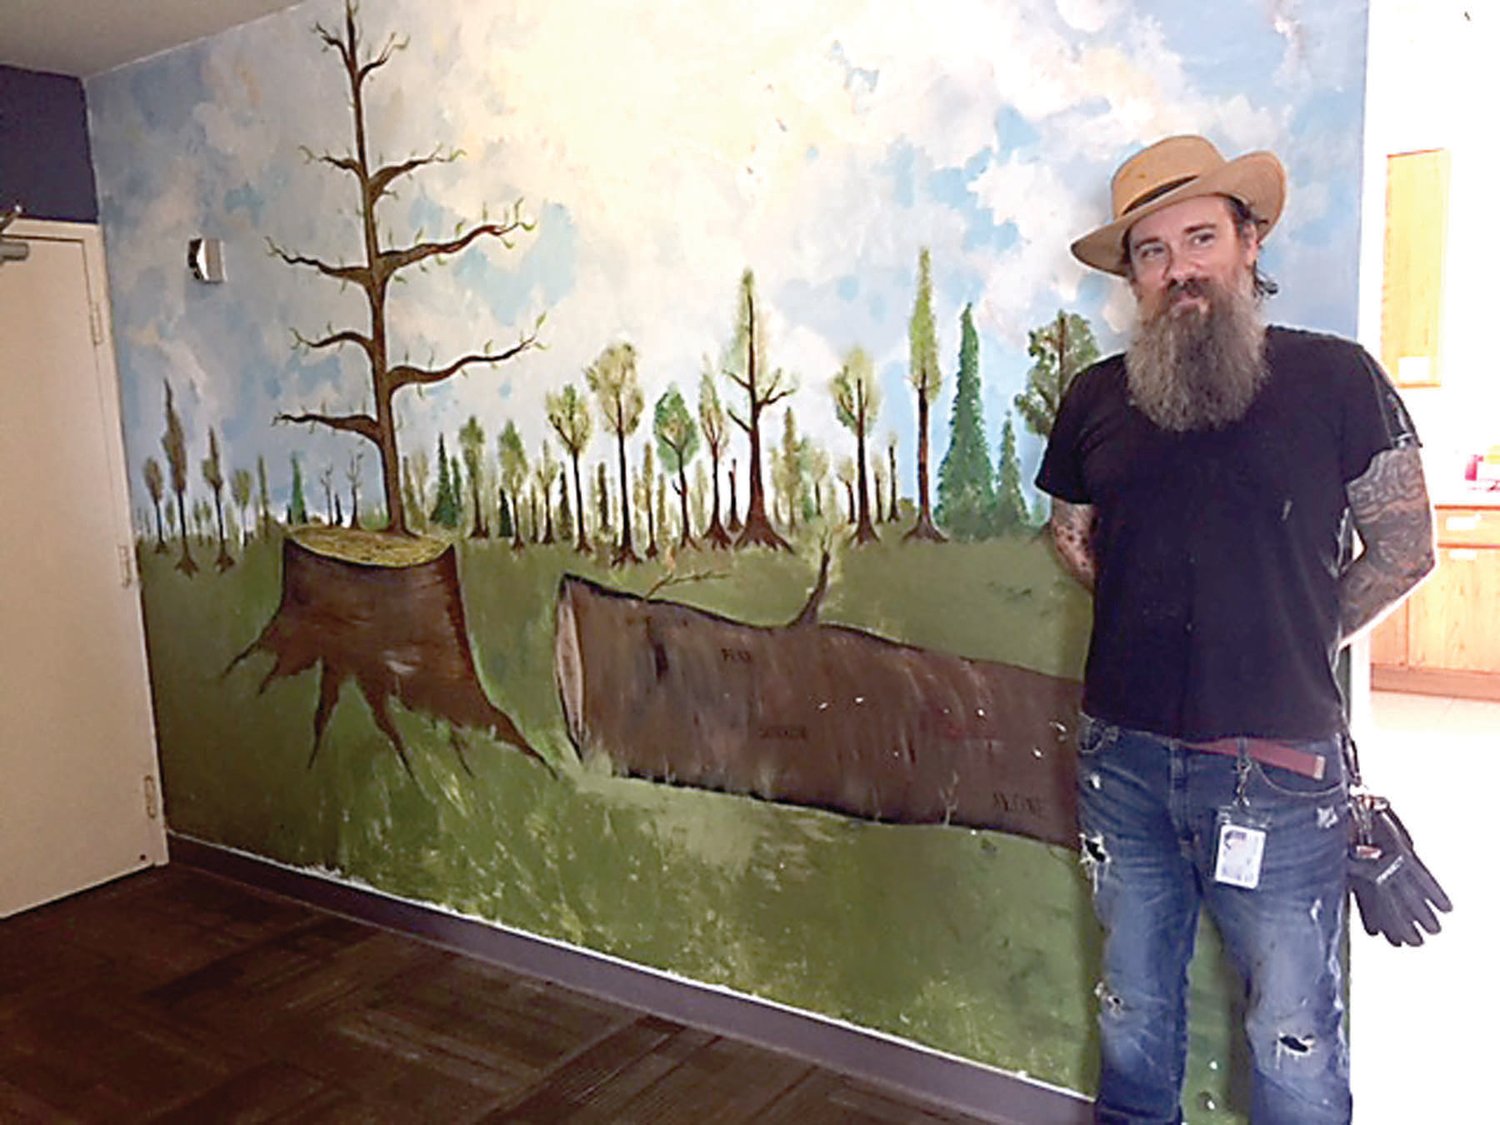 Rob Proffe, an outreach coordinator who is also an artist, helped perfect the mural symbolizing growth in the living room of Valley Youth House in Warminster.  The concept of the painting was developed by a group of teens living there. Photograph by Kathryn Finegan Clark